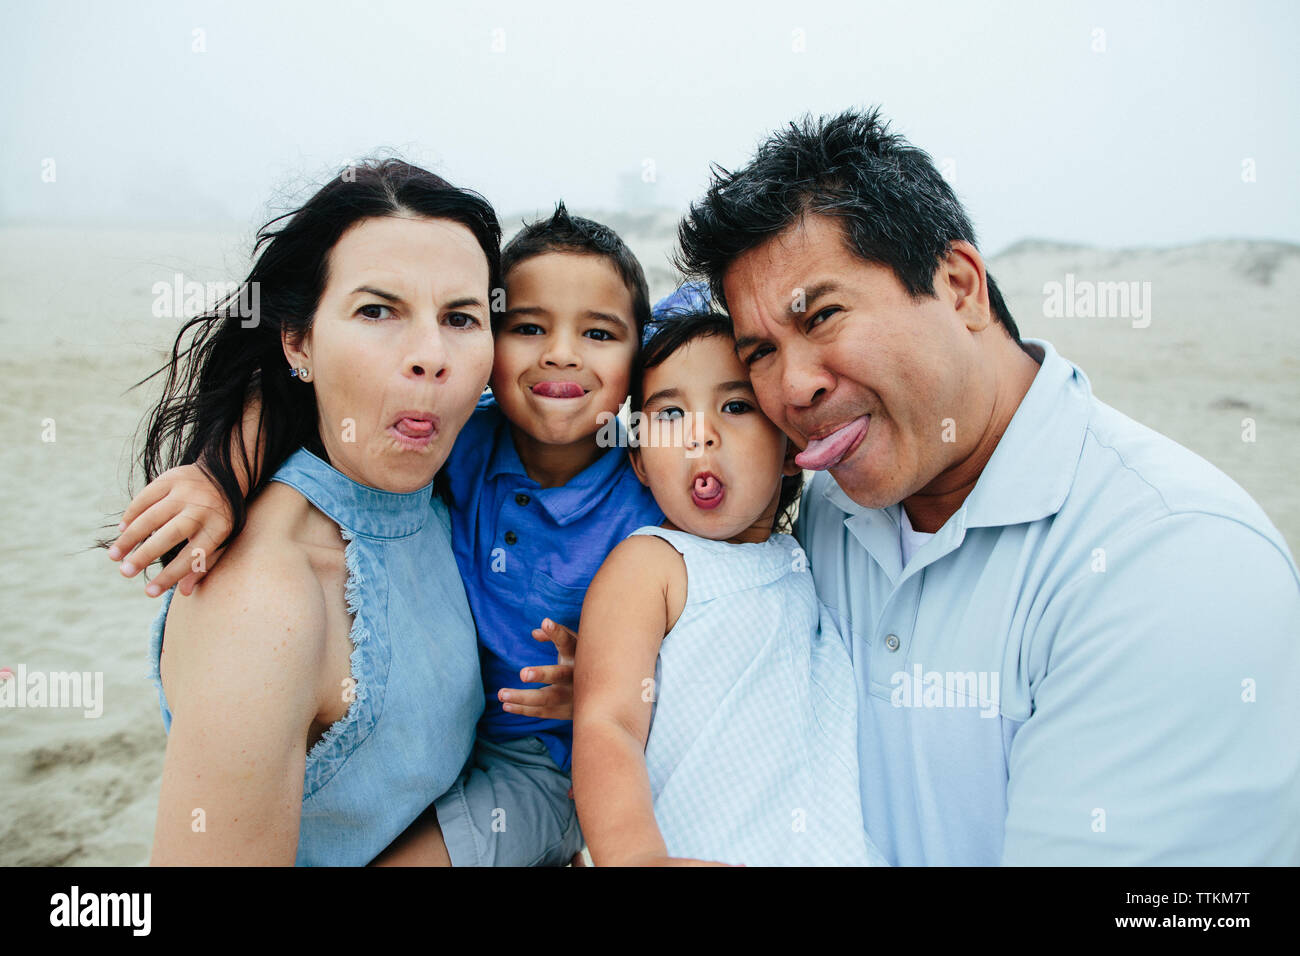 Family Of Four Make Silly Faces For Camera At Foggy Beach Stock Photo